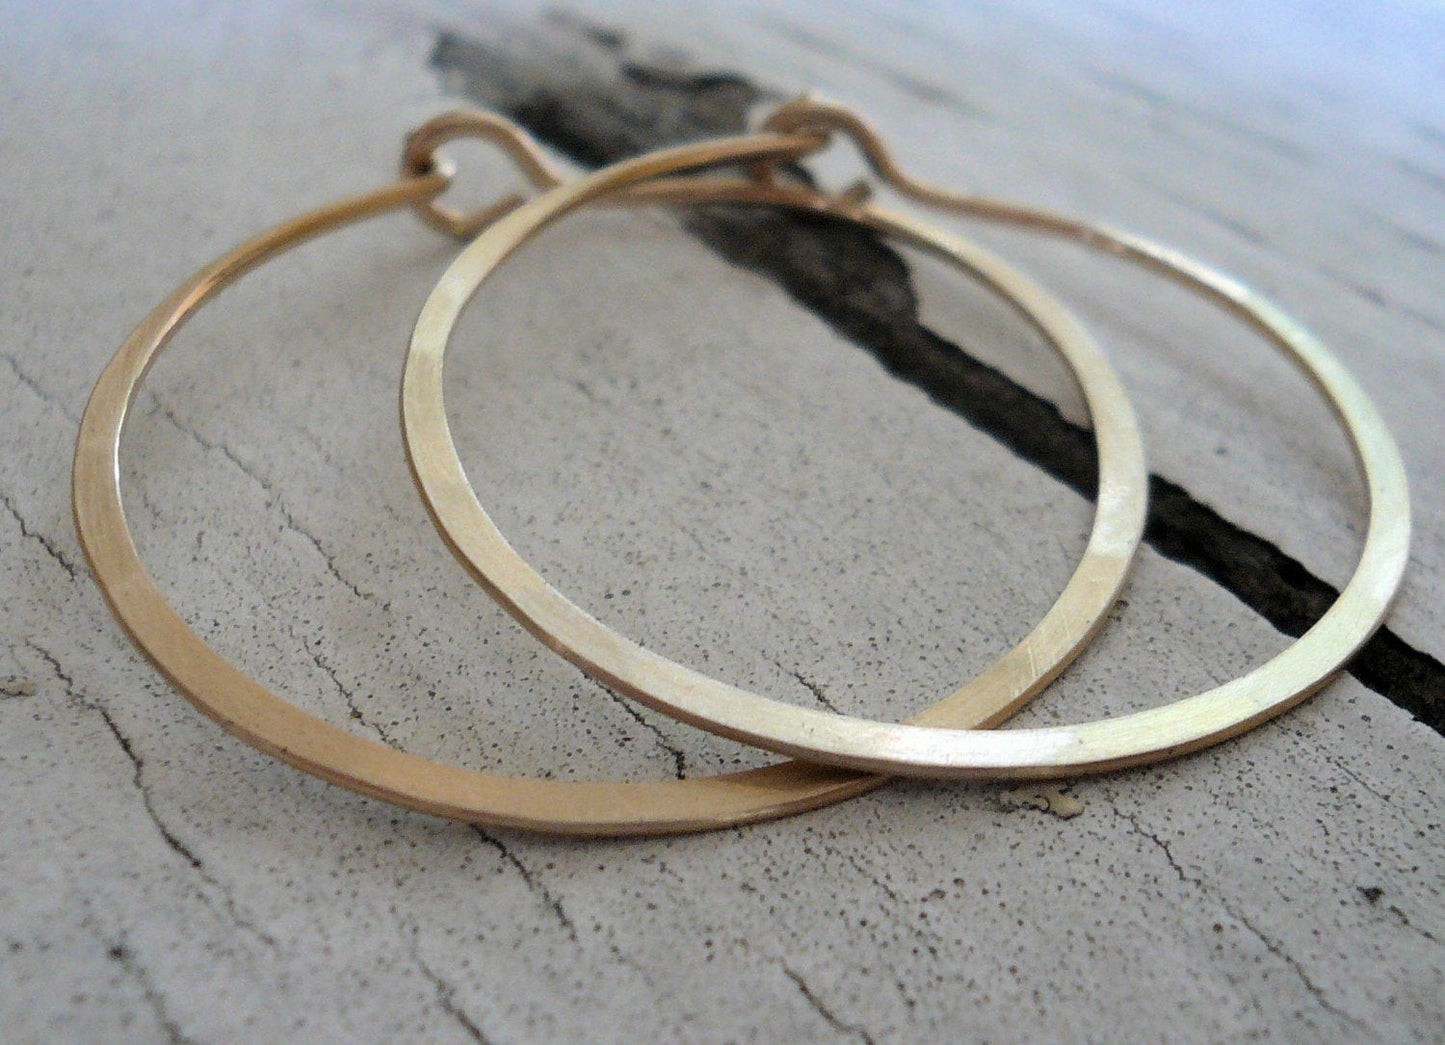 Satin Hoops - Handmade. Handforged. Matte 14k goldfill hoops. Choice of 6 sizes